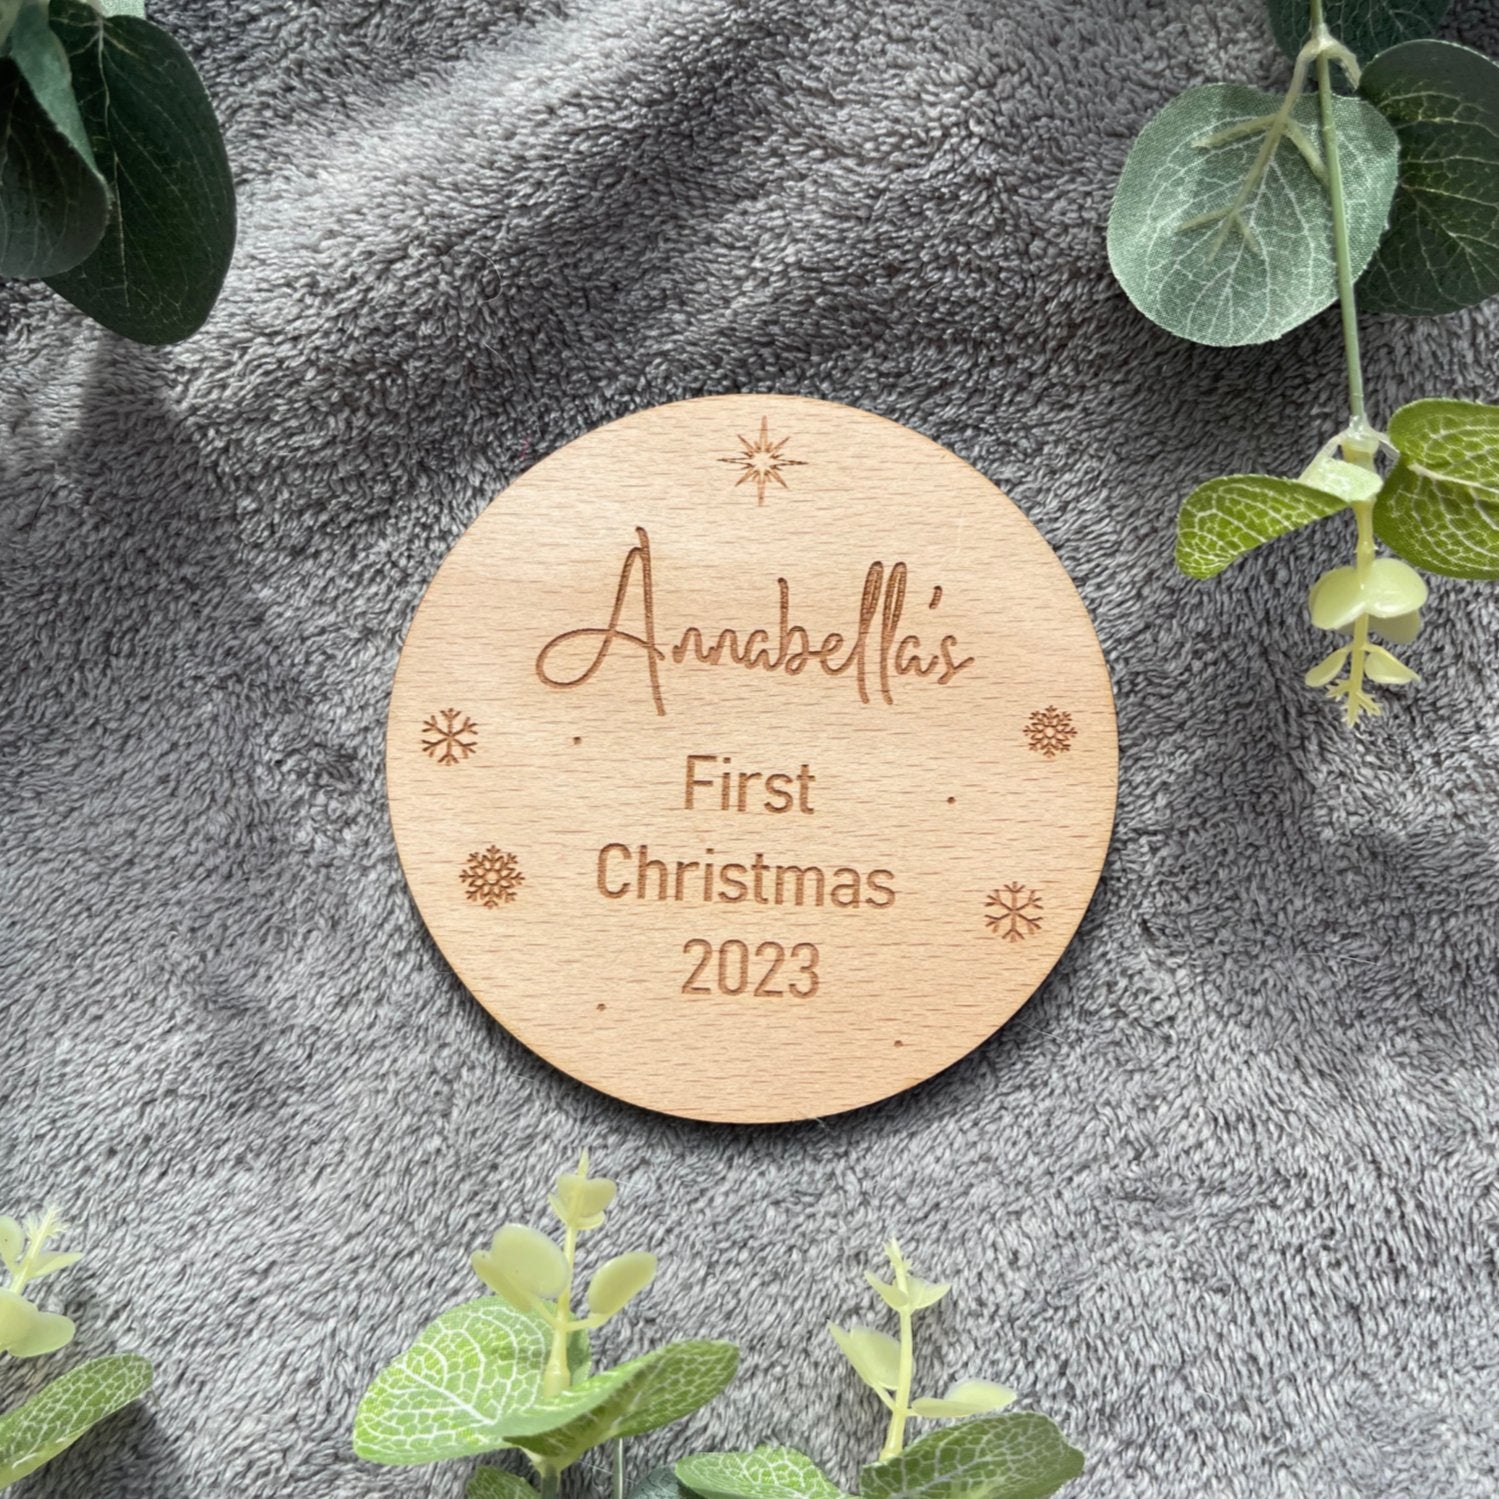 Charming wooden plaque for baby's first Christmas, crafted from durable 4 mm thick real beech veneer. Personalize with your baby's name for a unique touch. Perfect backdrop for holiday photos.